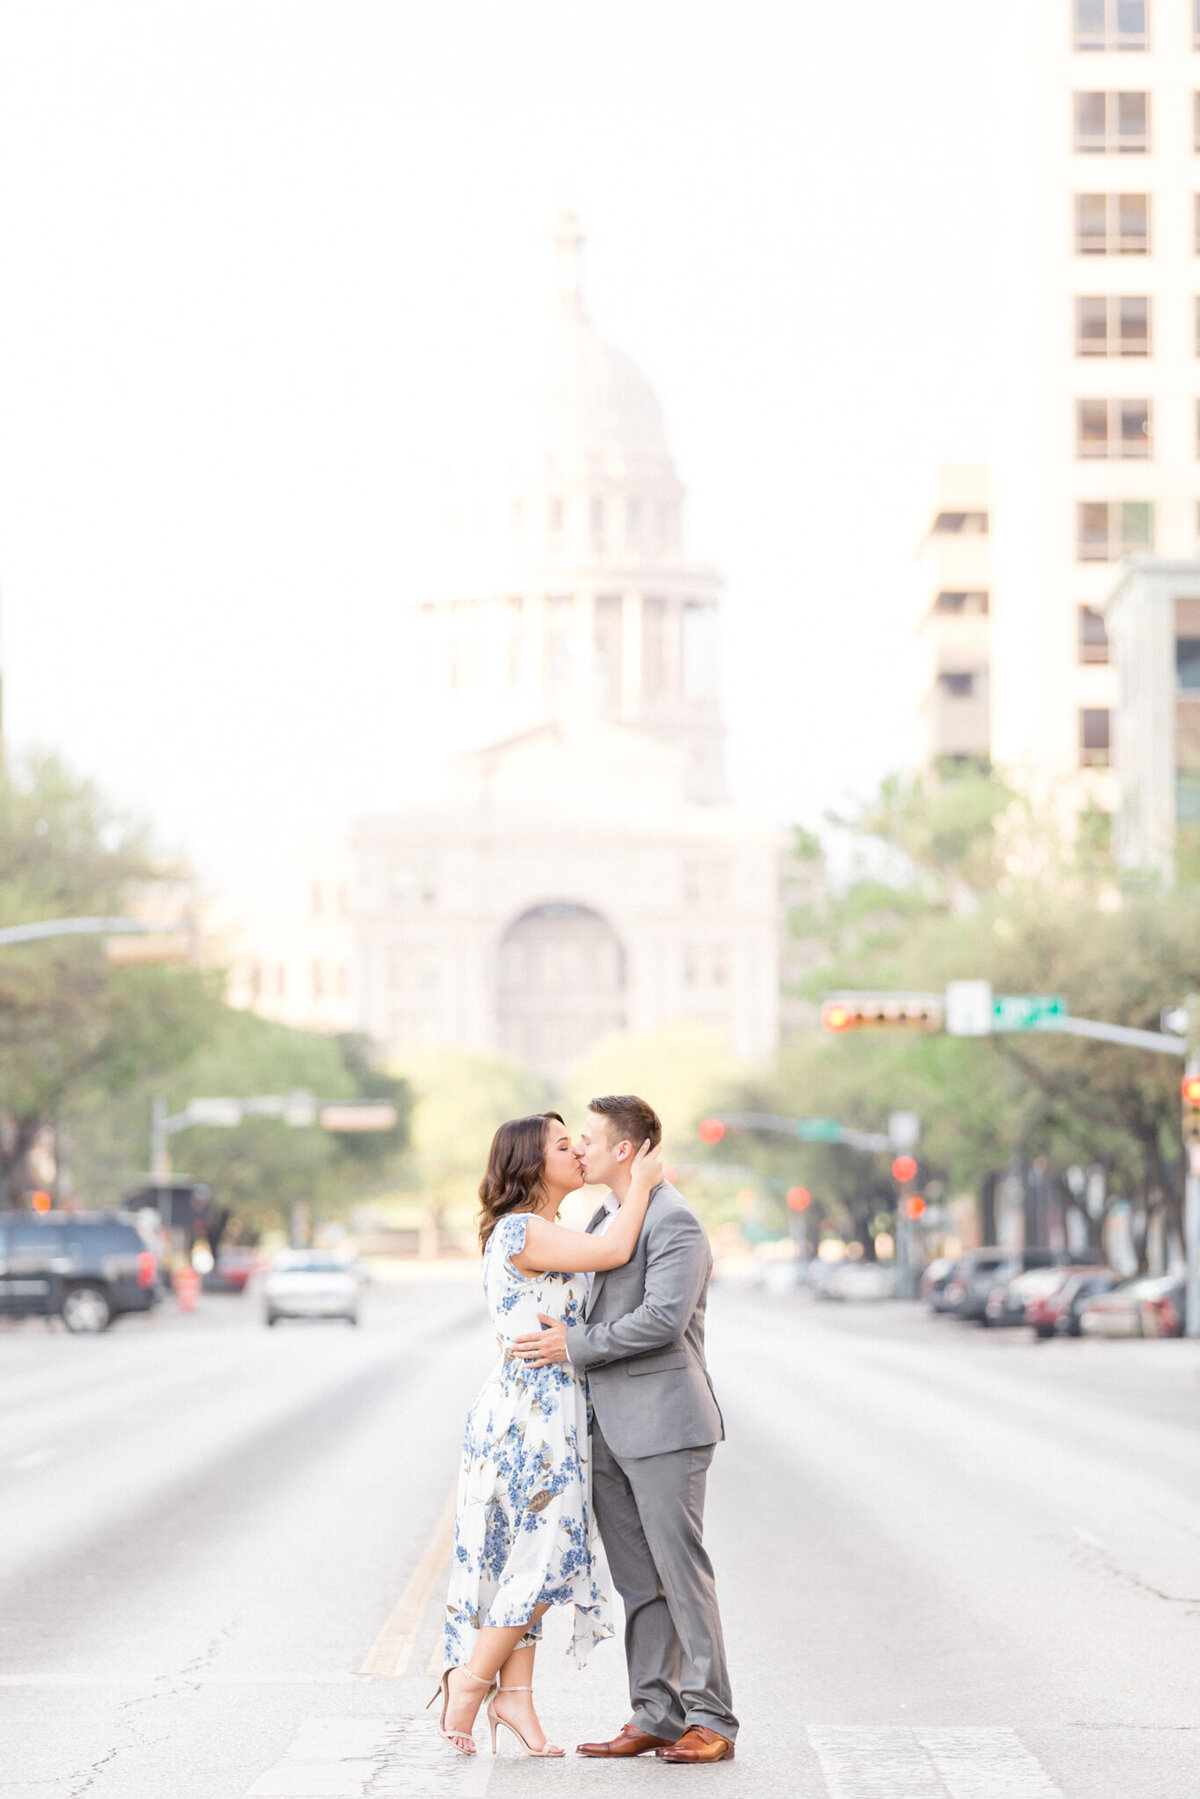 Jessica Chole Photography San Antonio Texas California Wedding Portrait Engagement Maternity Family Lifestyle Photographer Souther Cali TX CA Light Airy Bright Colorful Photography25